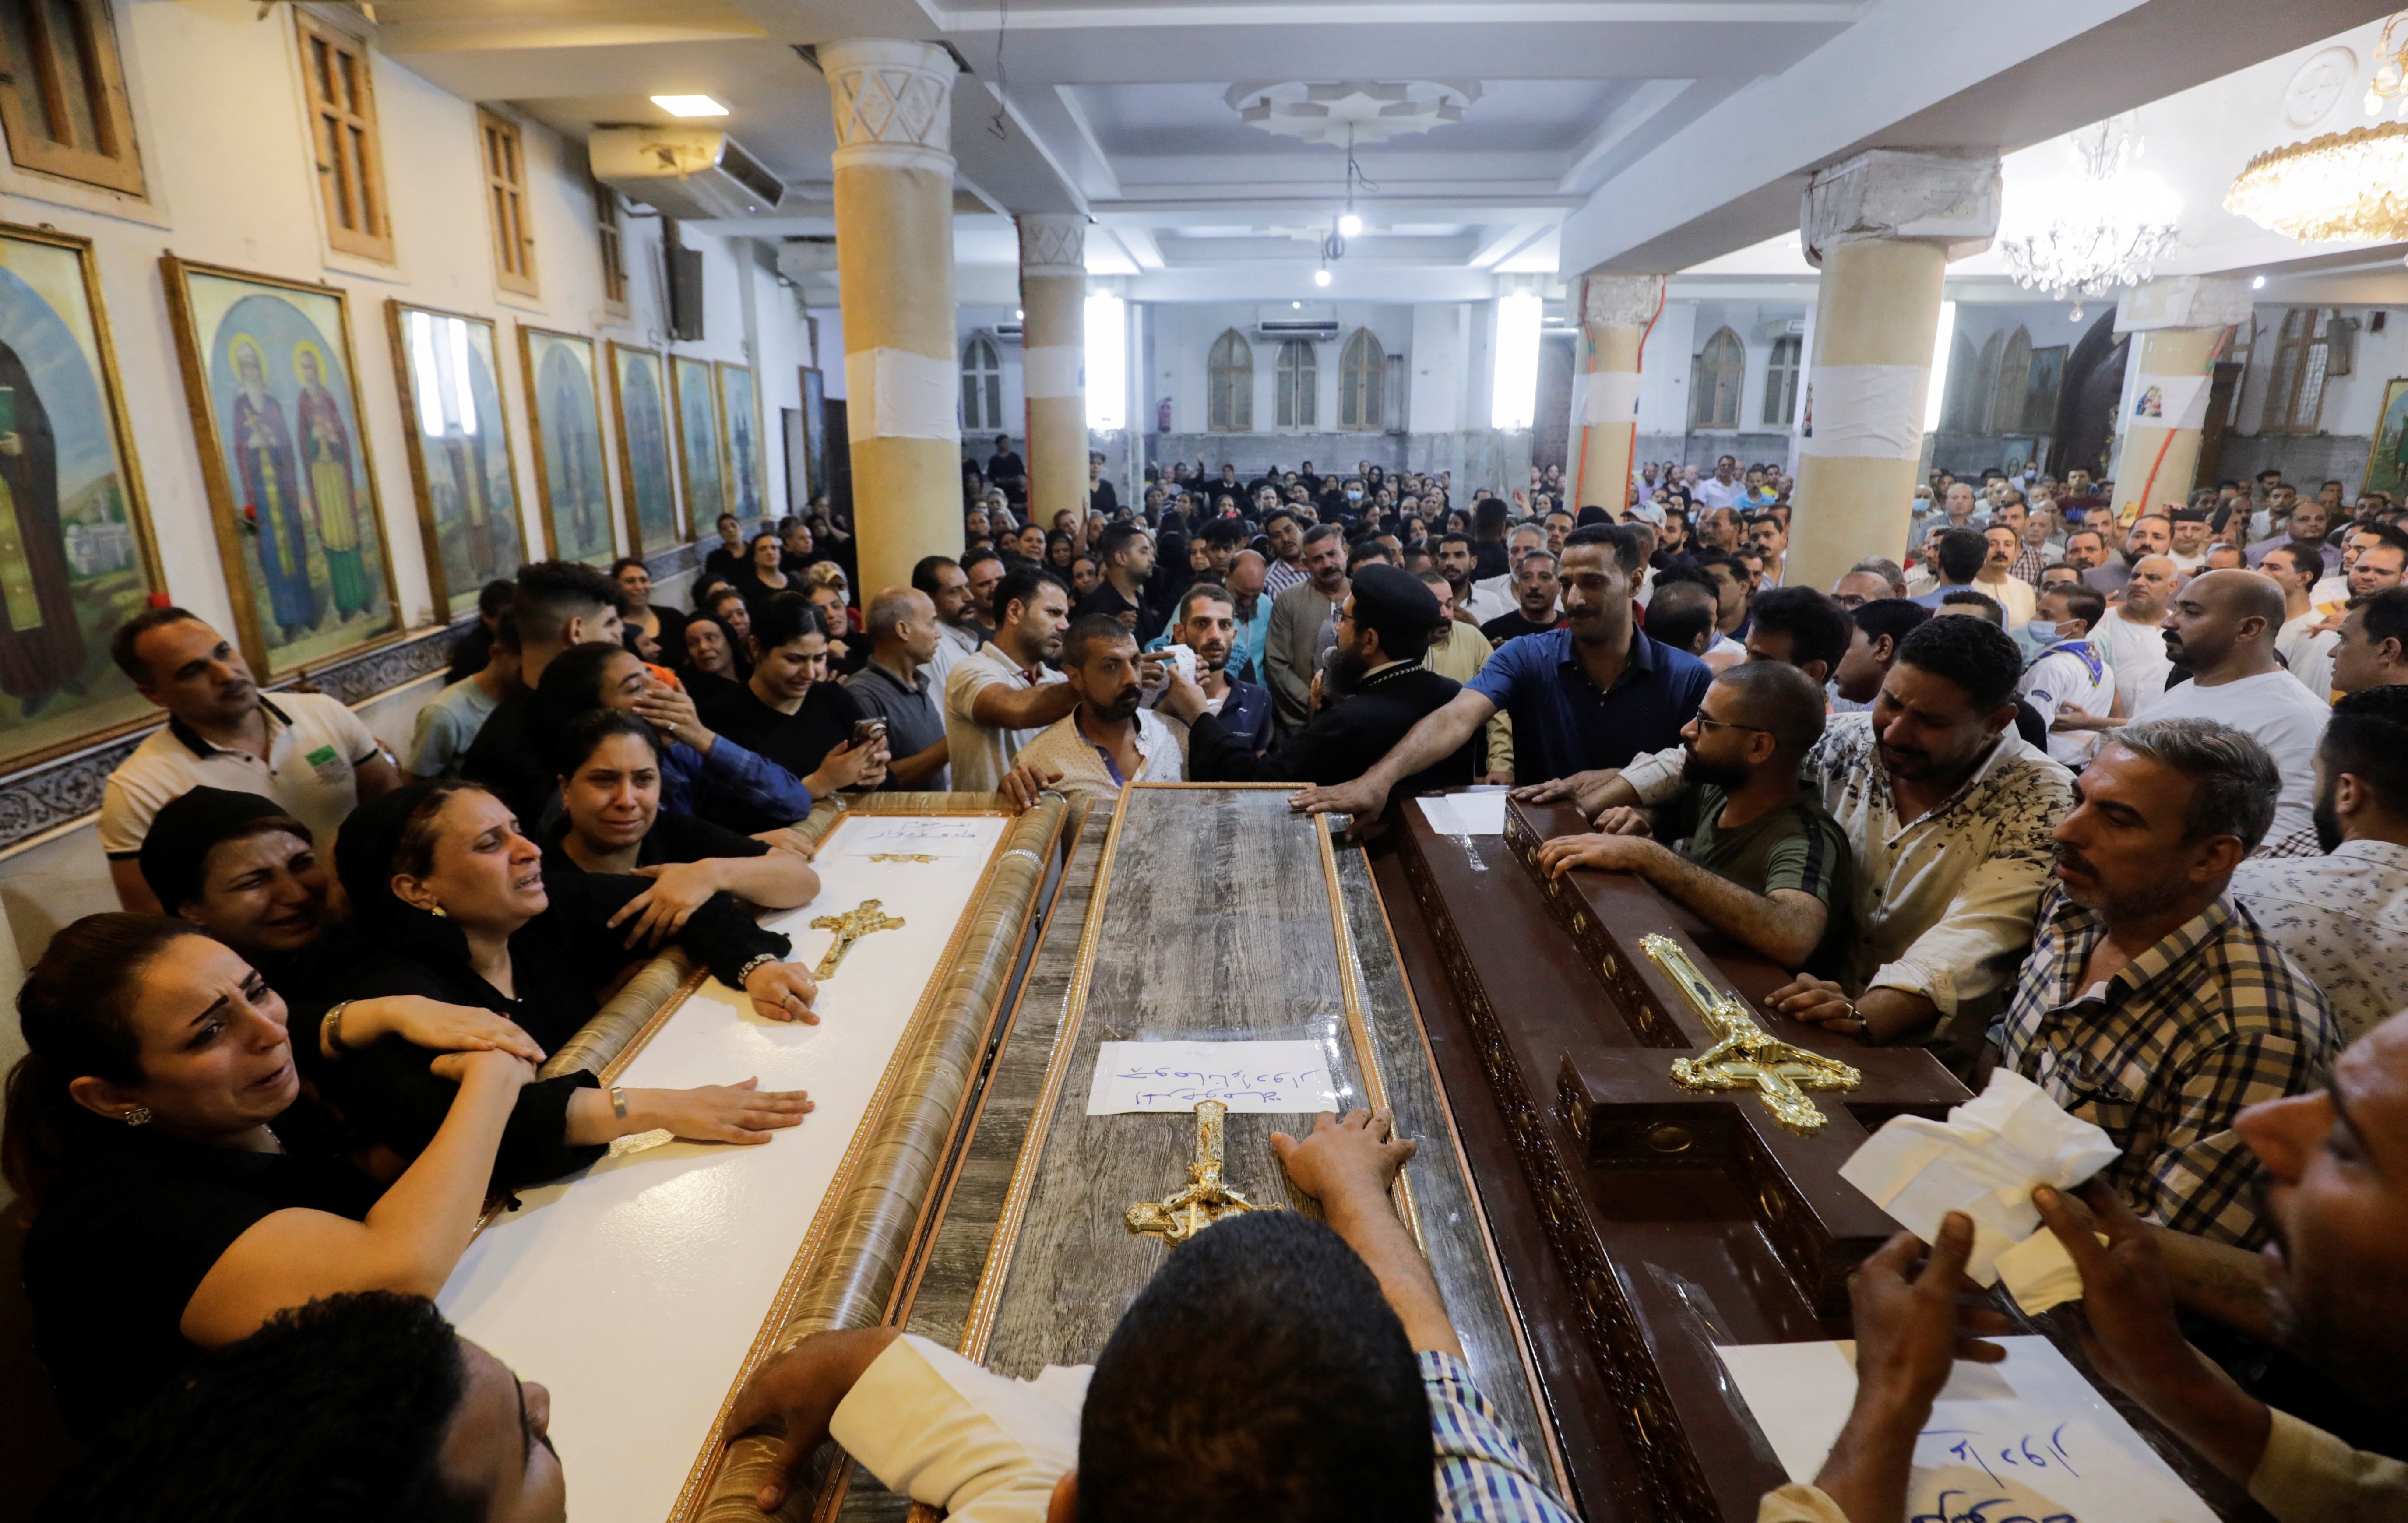 People react during the funeral of victims, who died due to the fire that broke out at the Abu Sifin church, inside the Church of the Blessed Virgin Mary at Warraq Al Arab district in Giza Governorate, Egypt, August 14, 2022. REUTERS/Mohamed Abd El Ghany